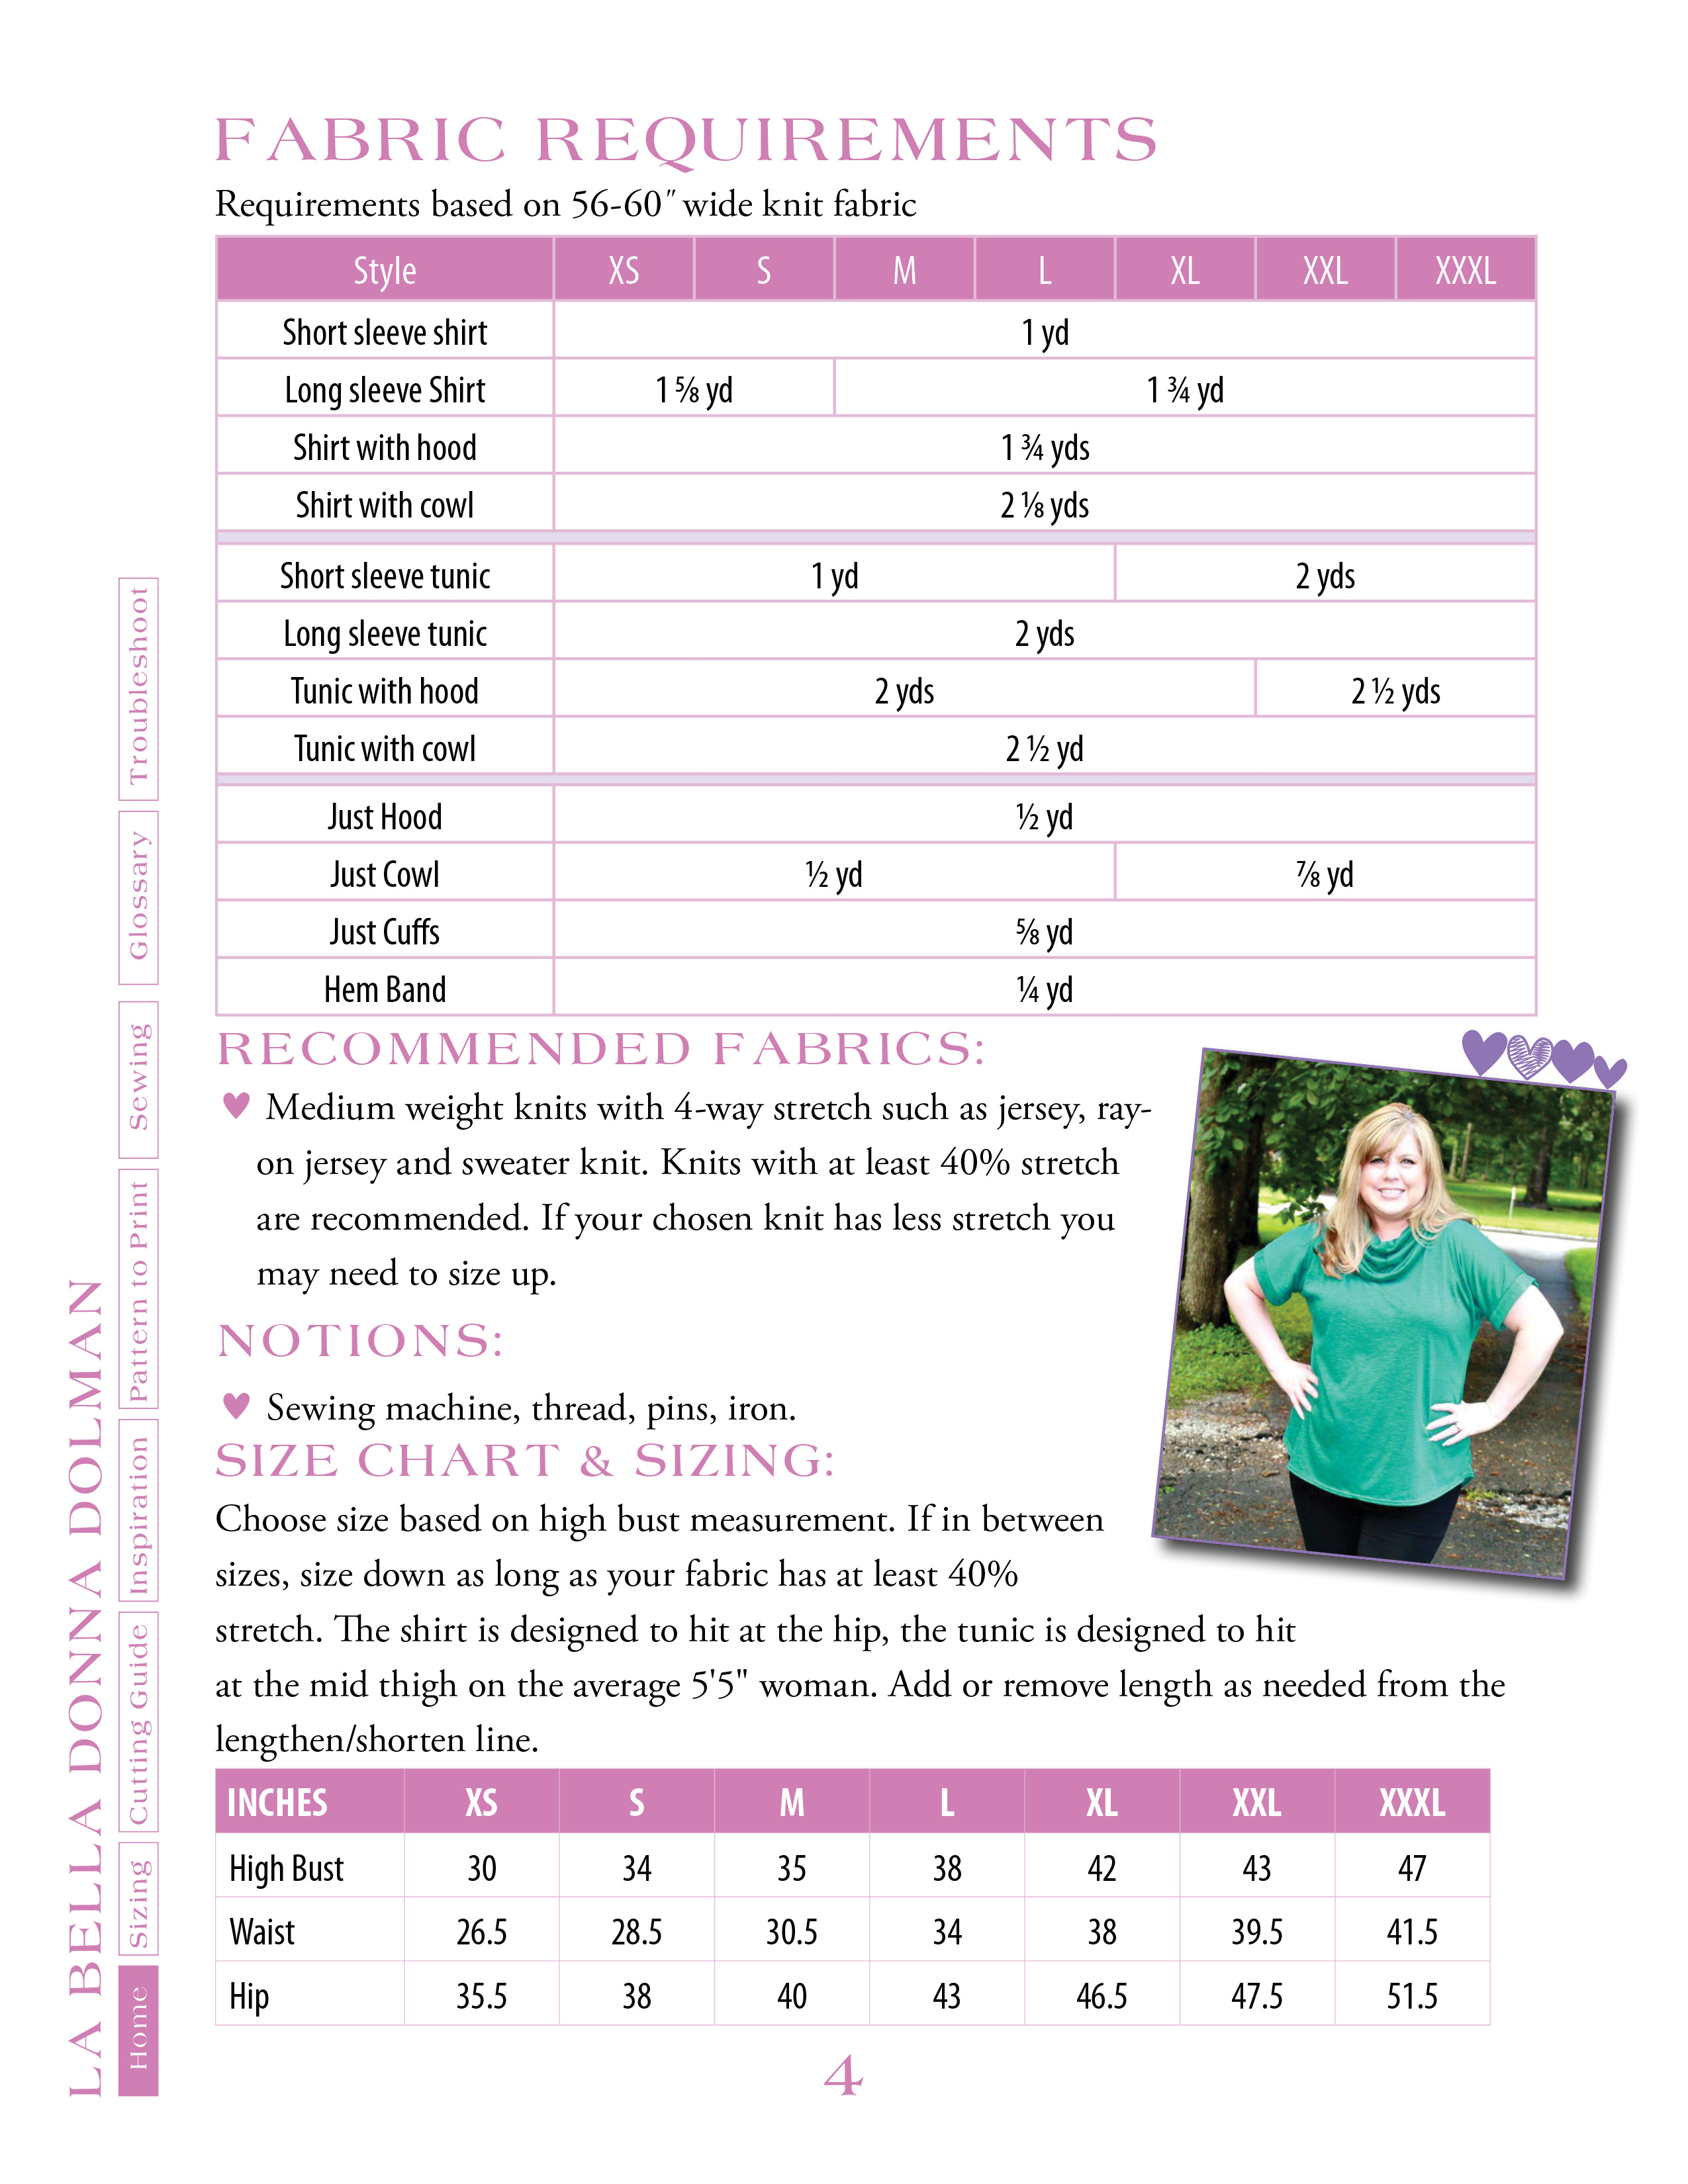 Size Charts - Love Notions Sewing Patterns